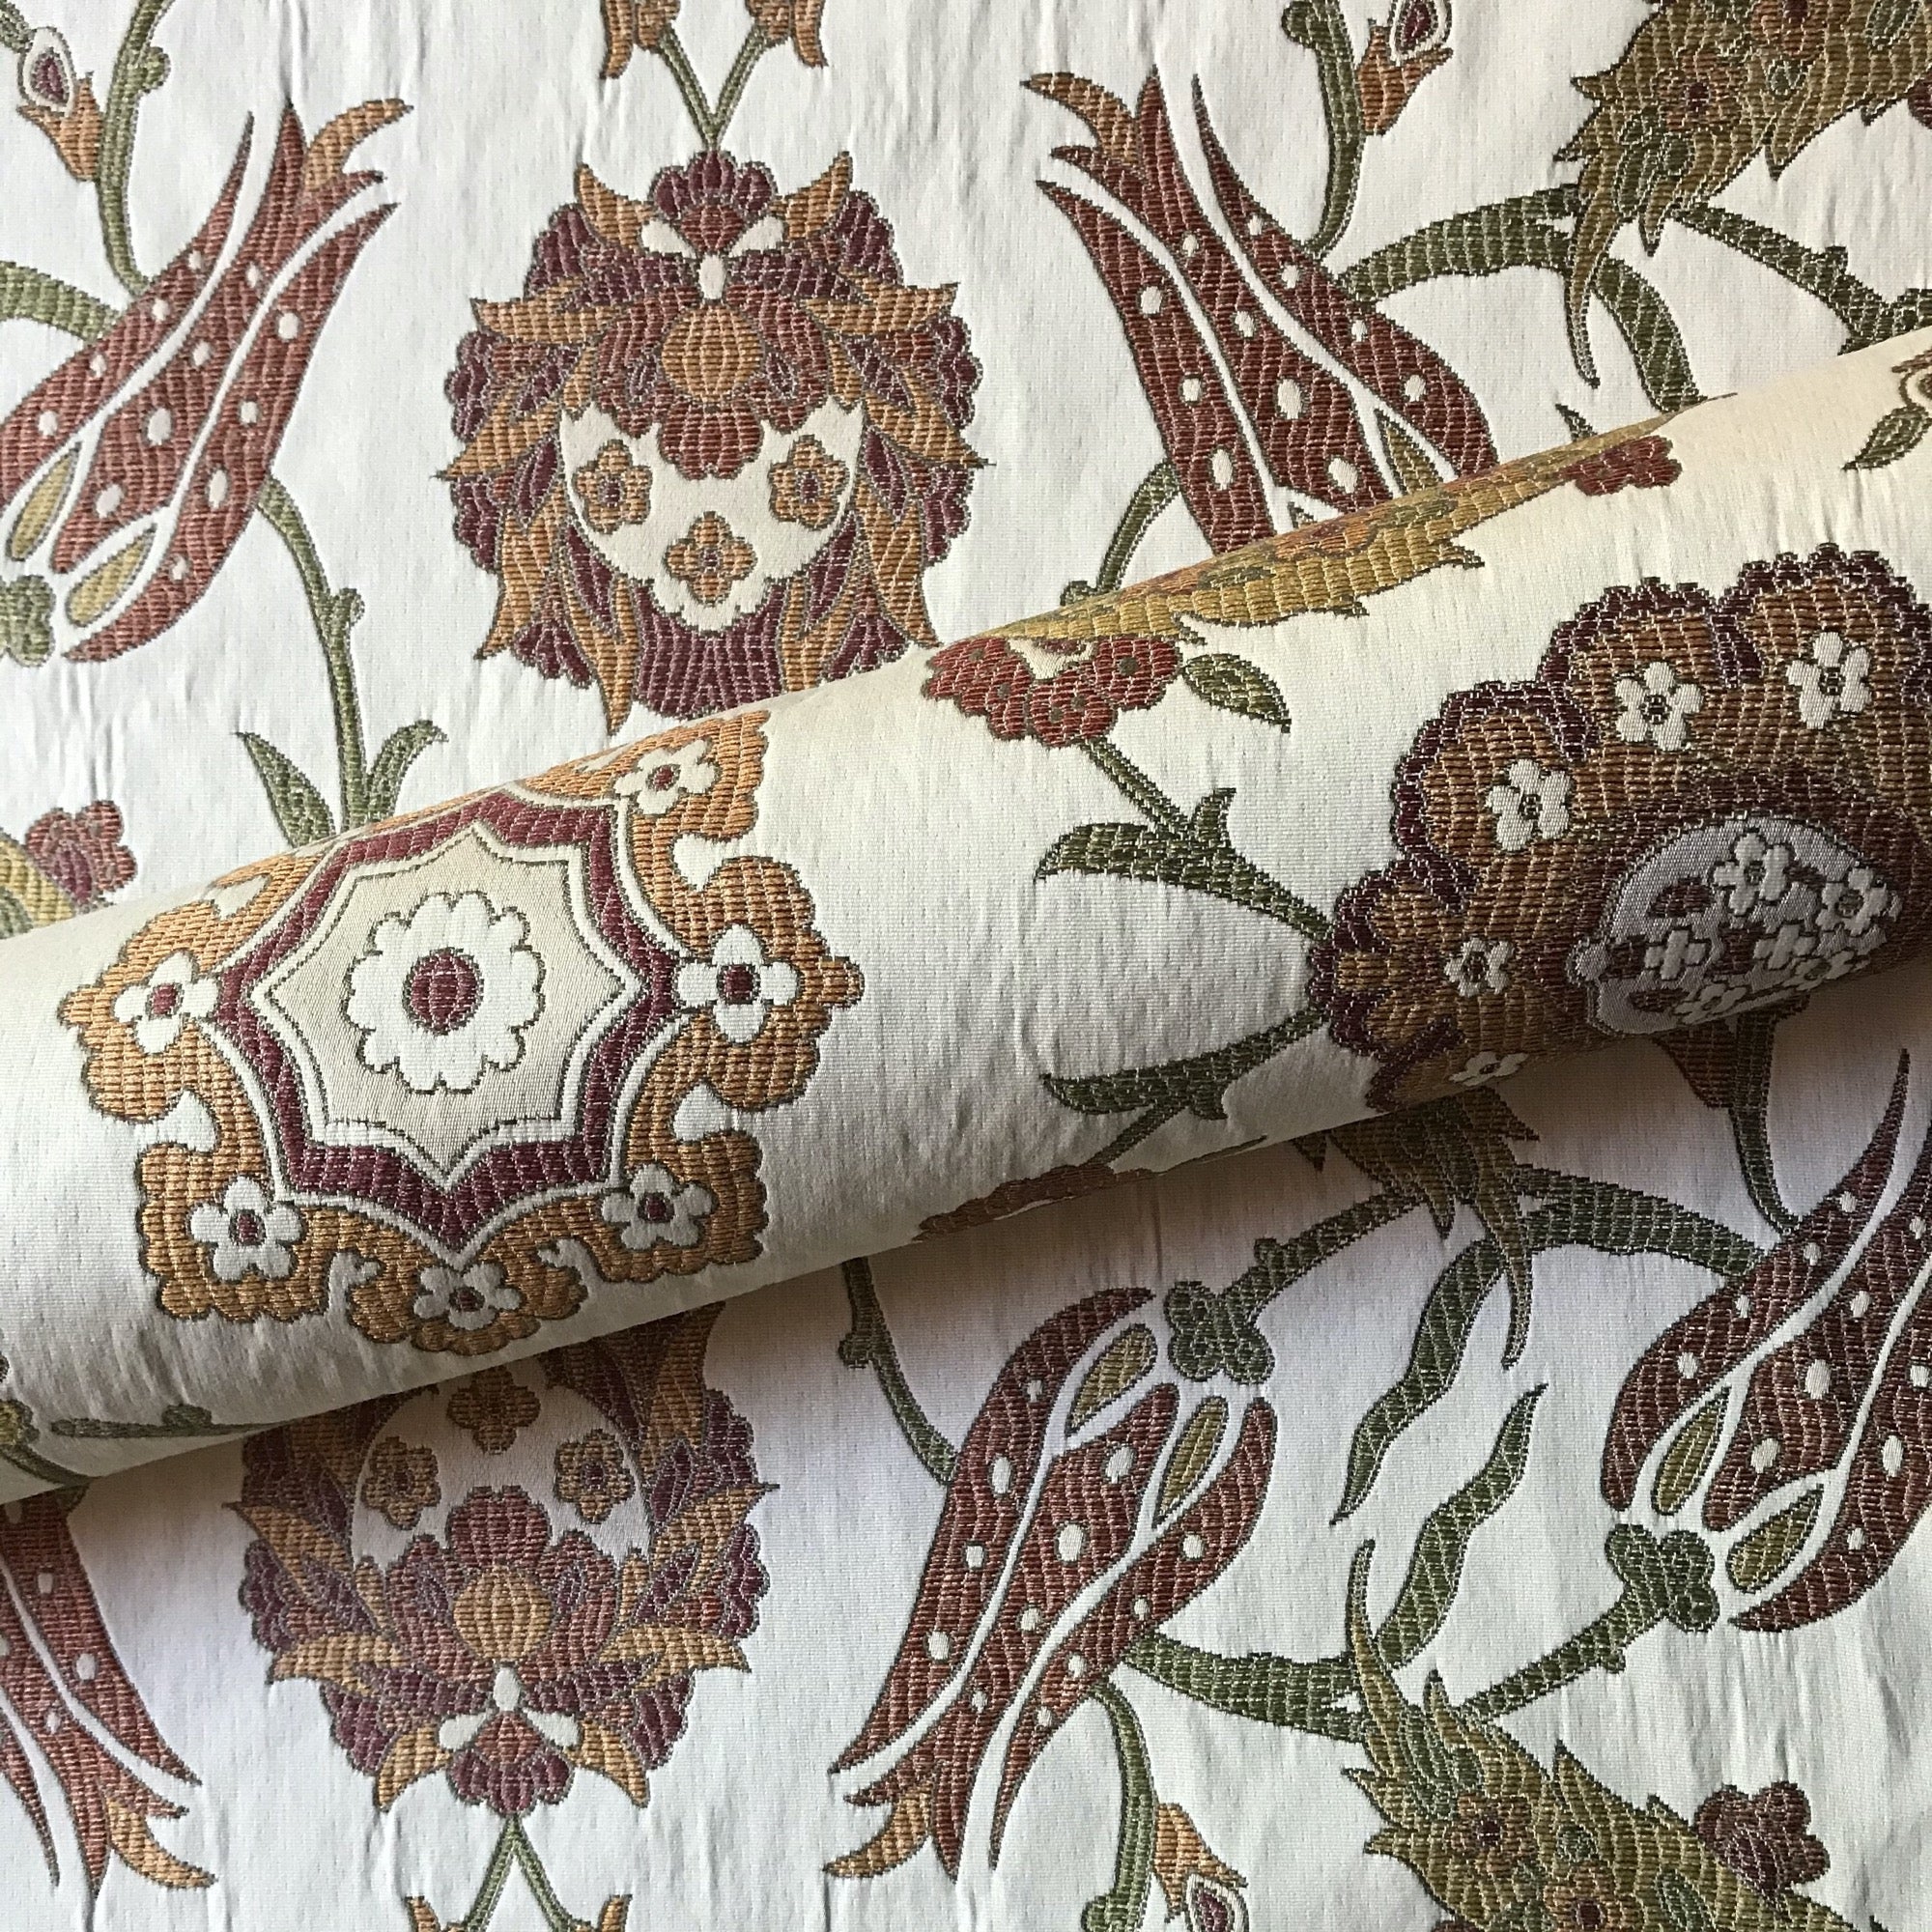 Vintage-Look Floral Printed Heavy Linen Cotton - Green / Dusty Teal / Earth  Tones - Fabric by the Yard